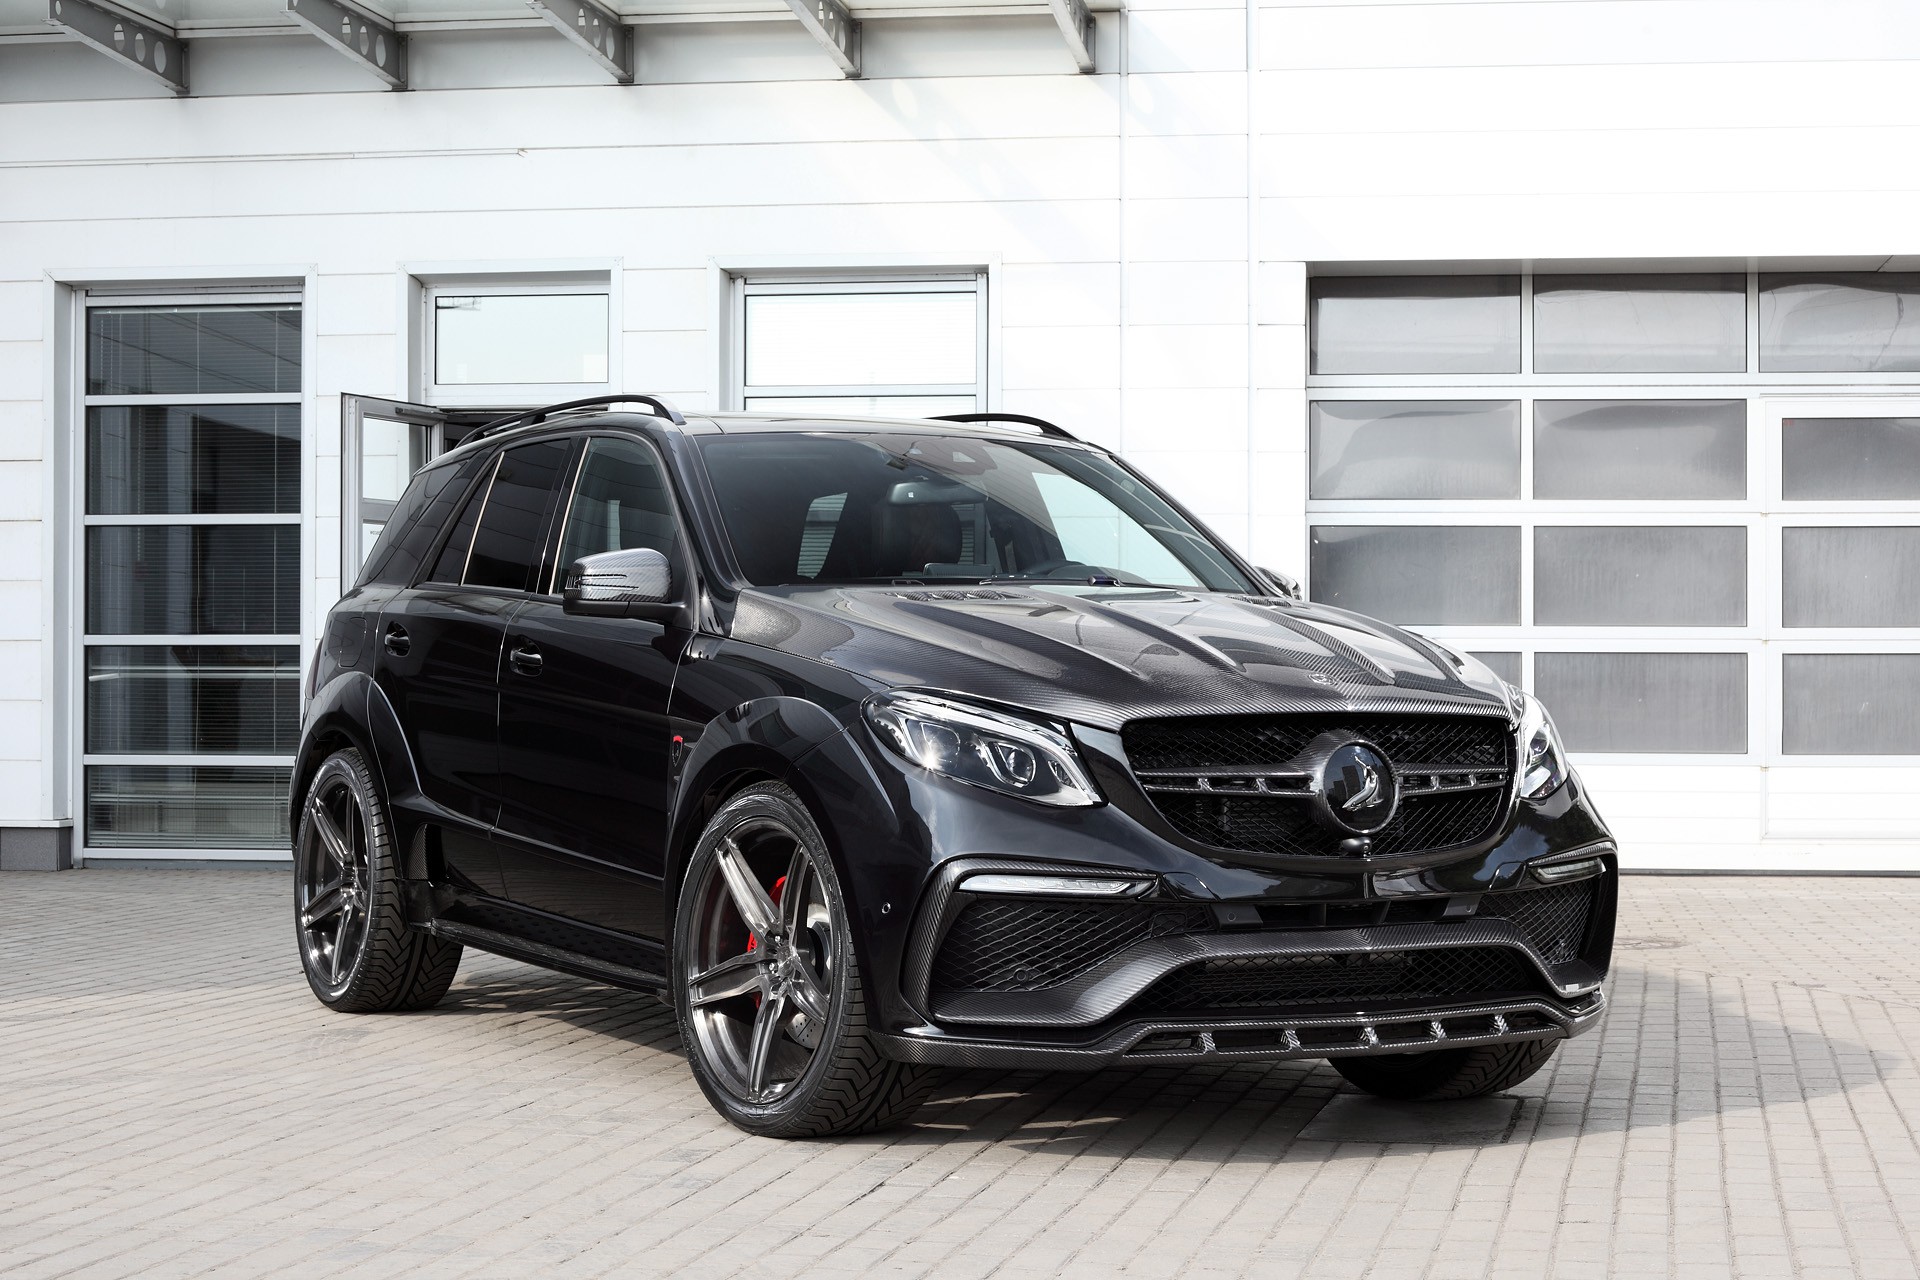 TopCar Revamps the Exterior Styling of the Mercedes-Benz V-Class